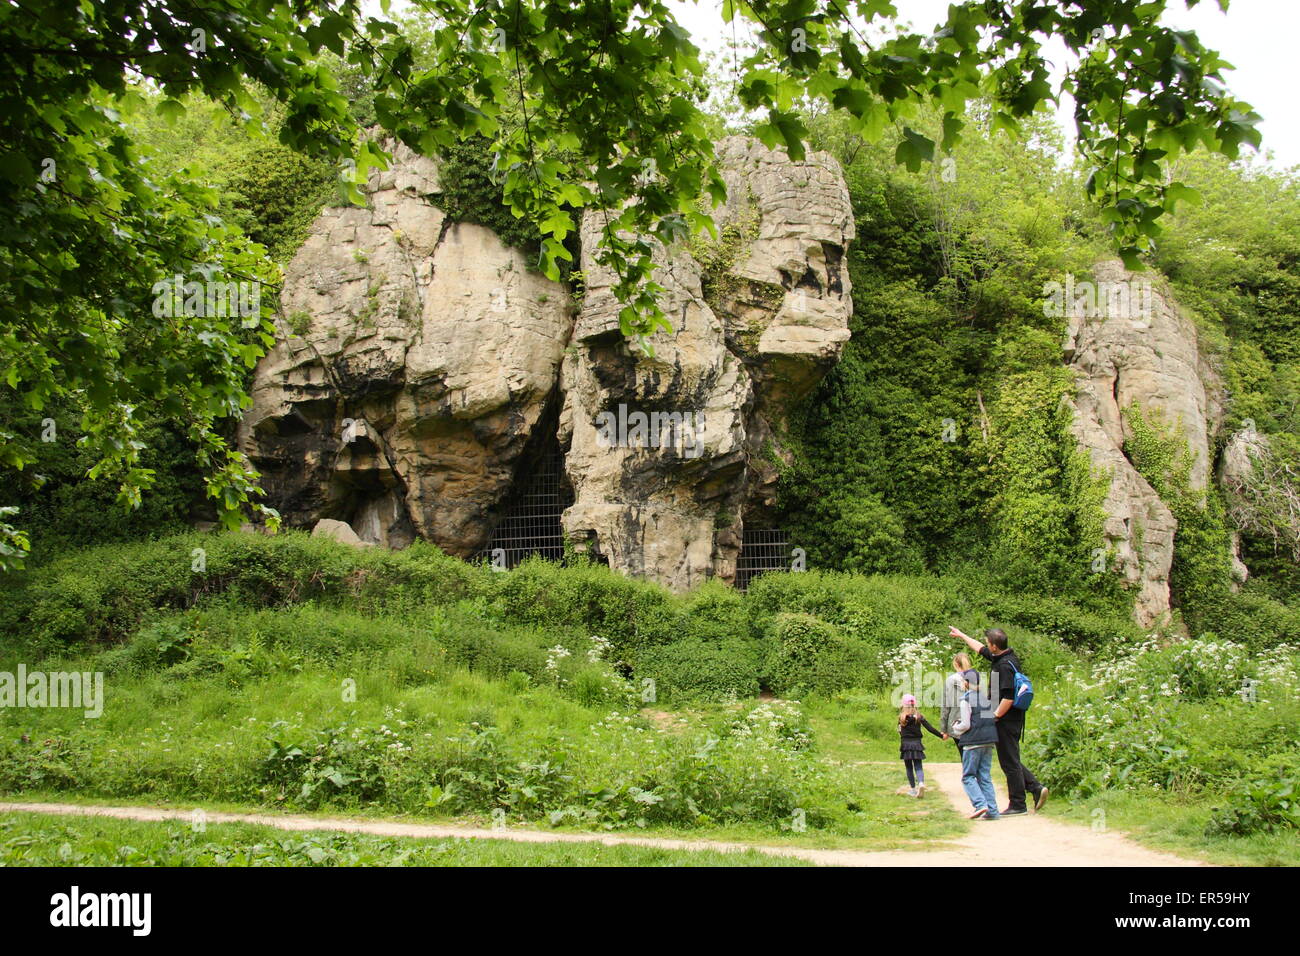 Visitors pass by caves at Creswell Crags, a limestone gorge on the border of Derbyshire and Nottinghamshire, Britain, UK Stock Photo